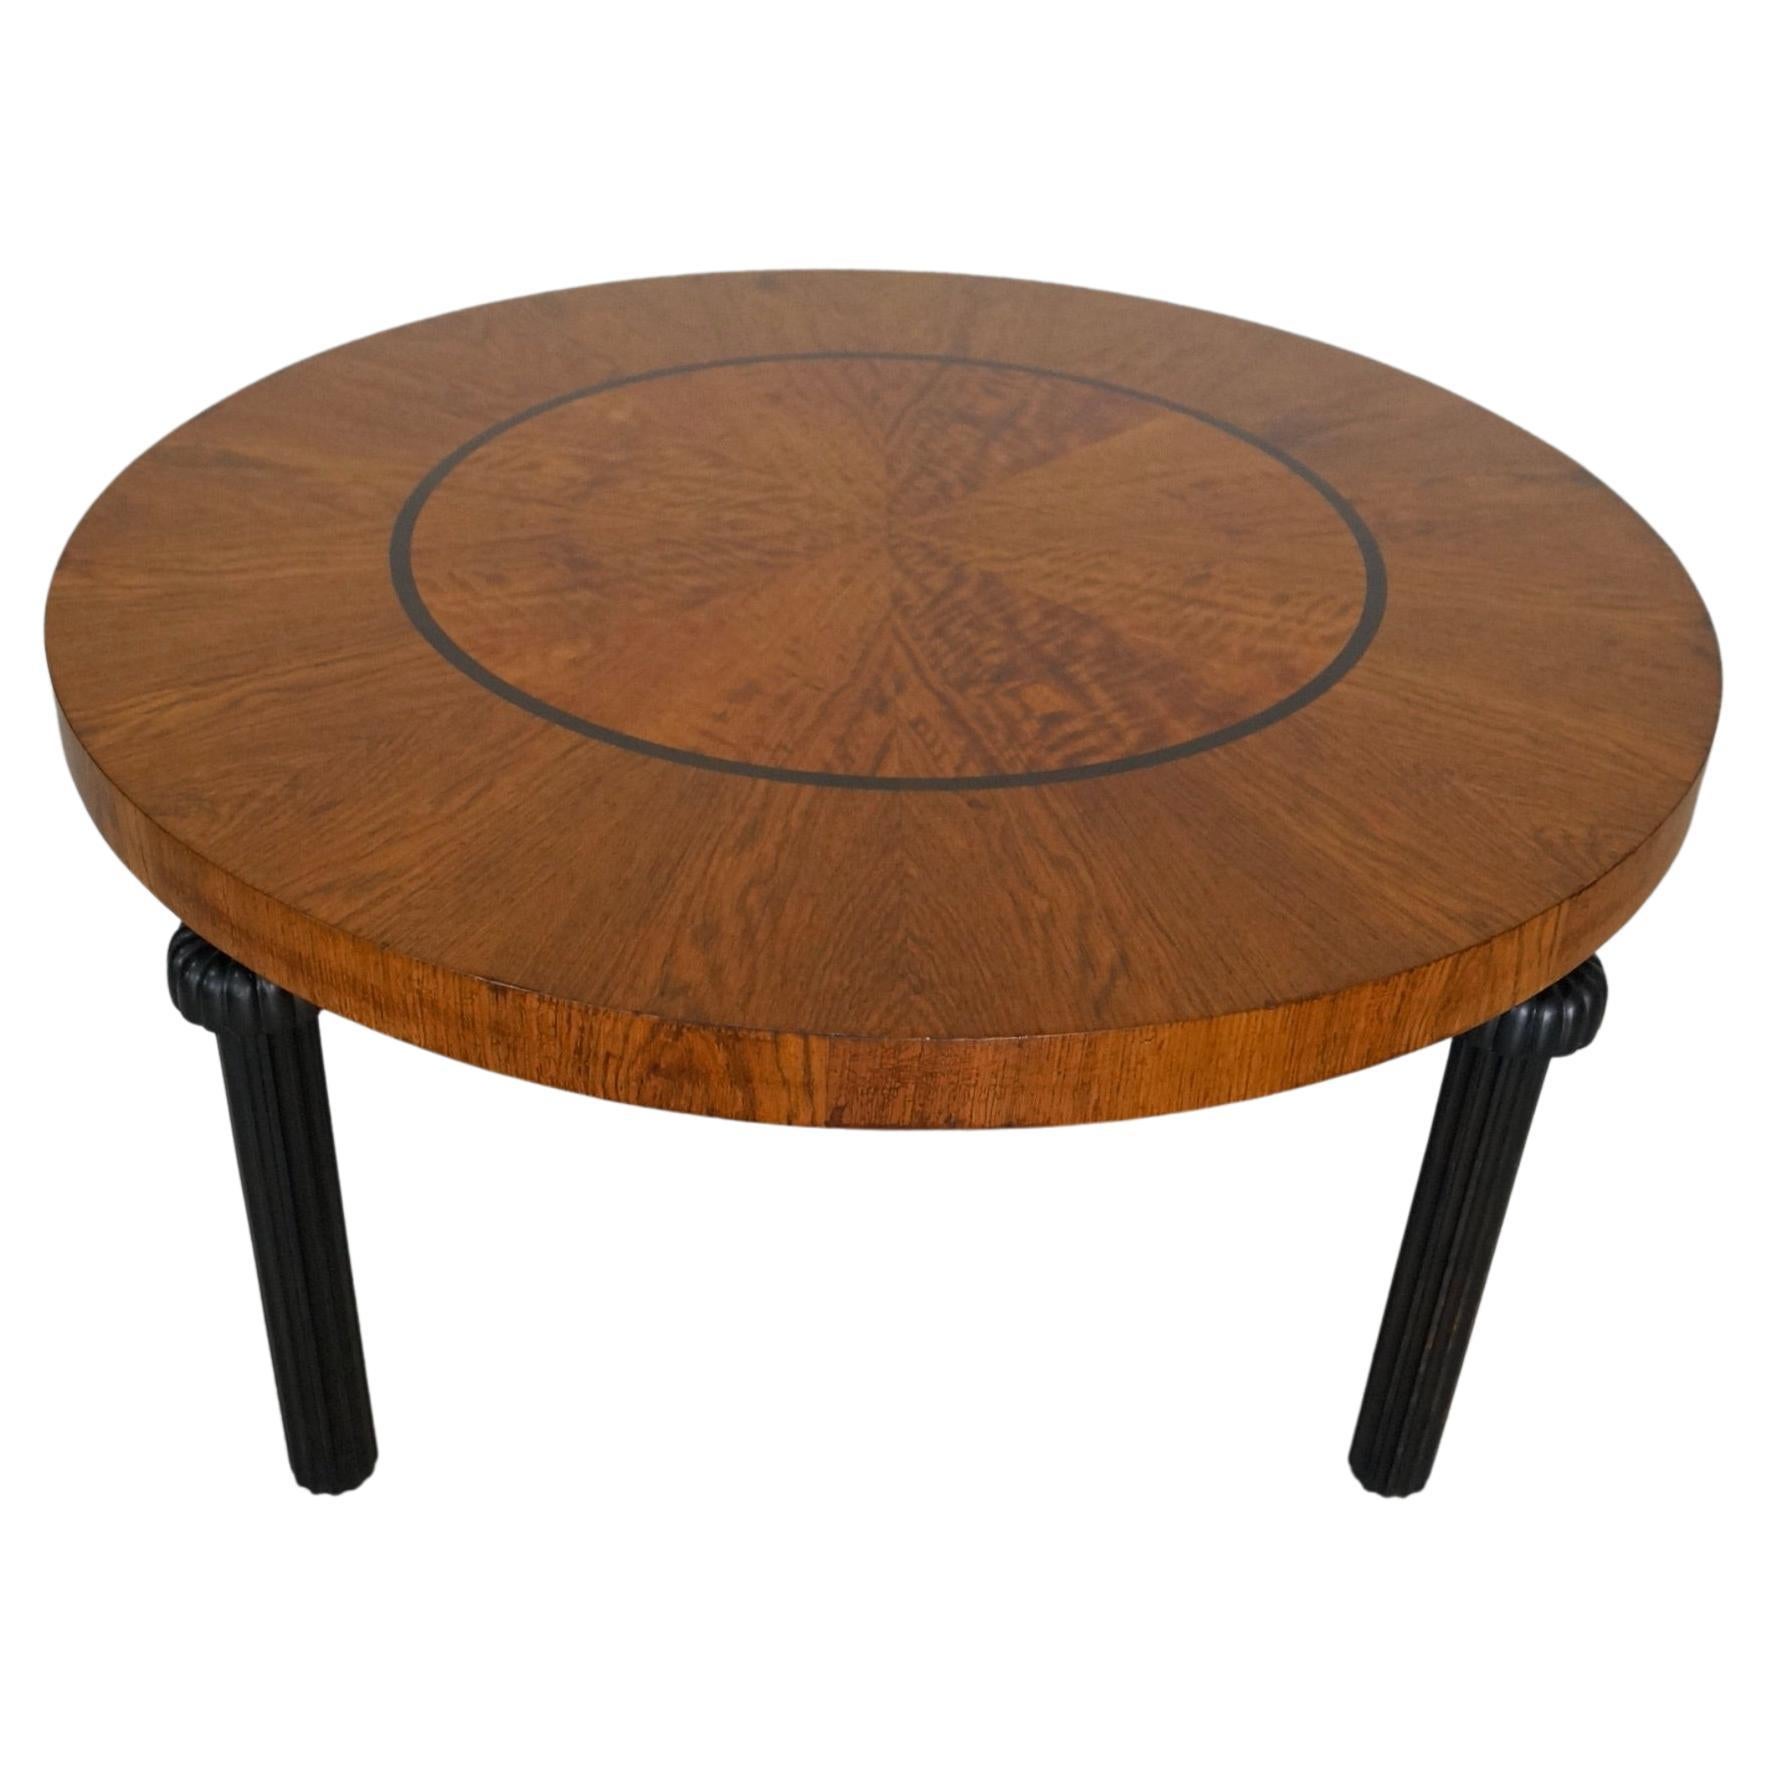 1940's Art Deco Hollywood Regency Round Coffee Table